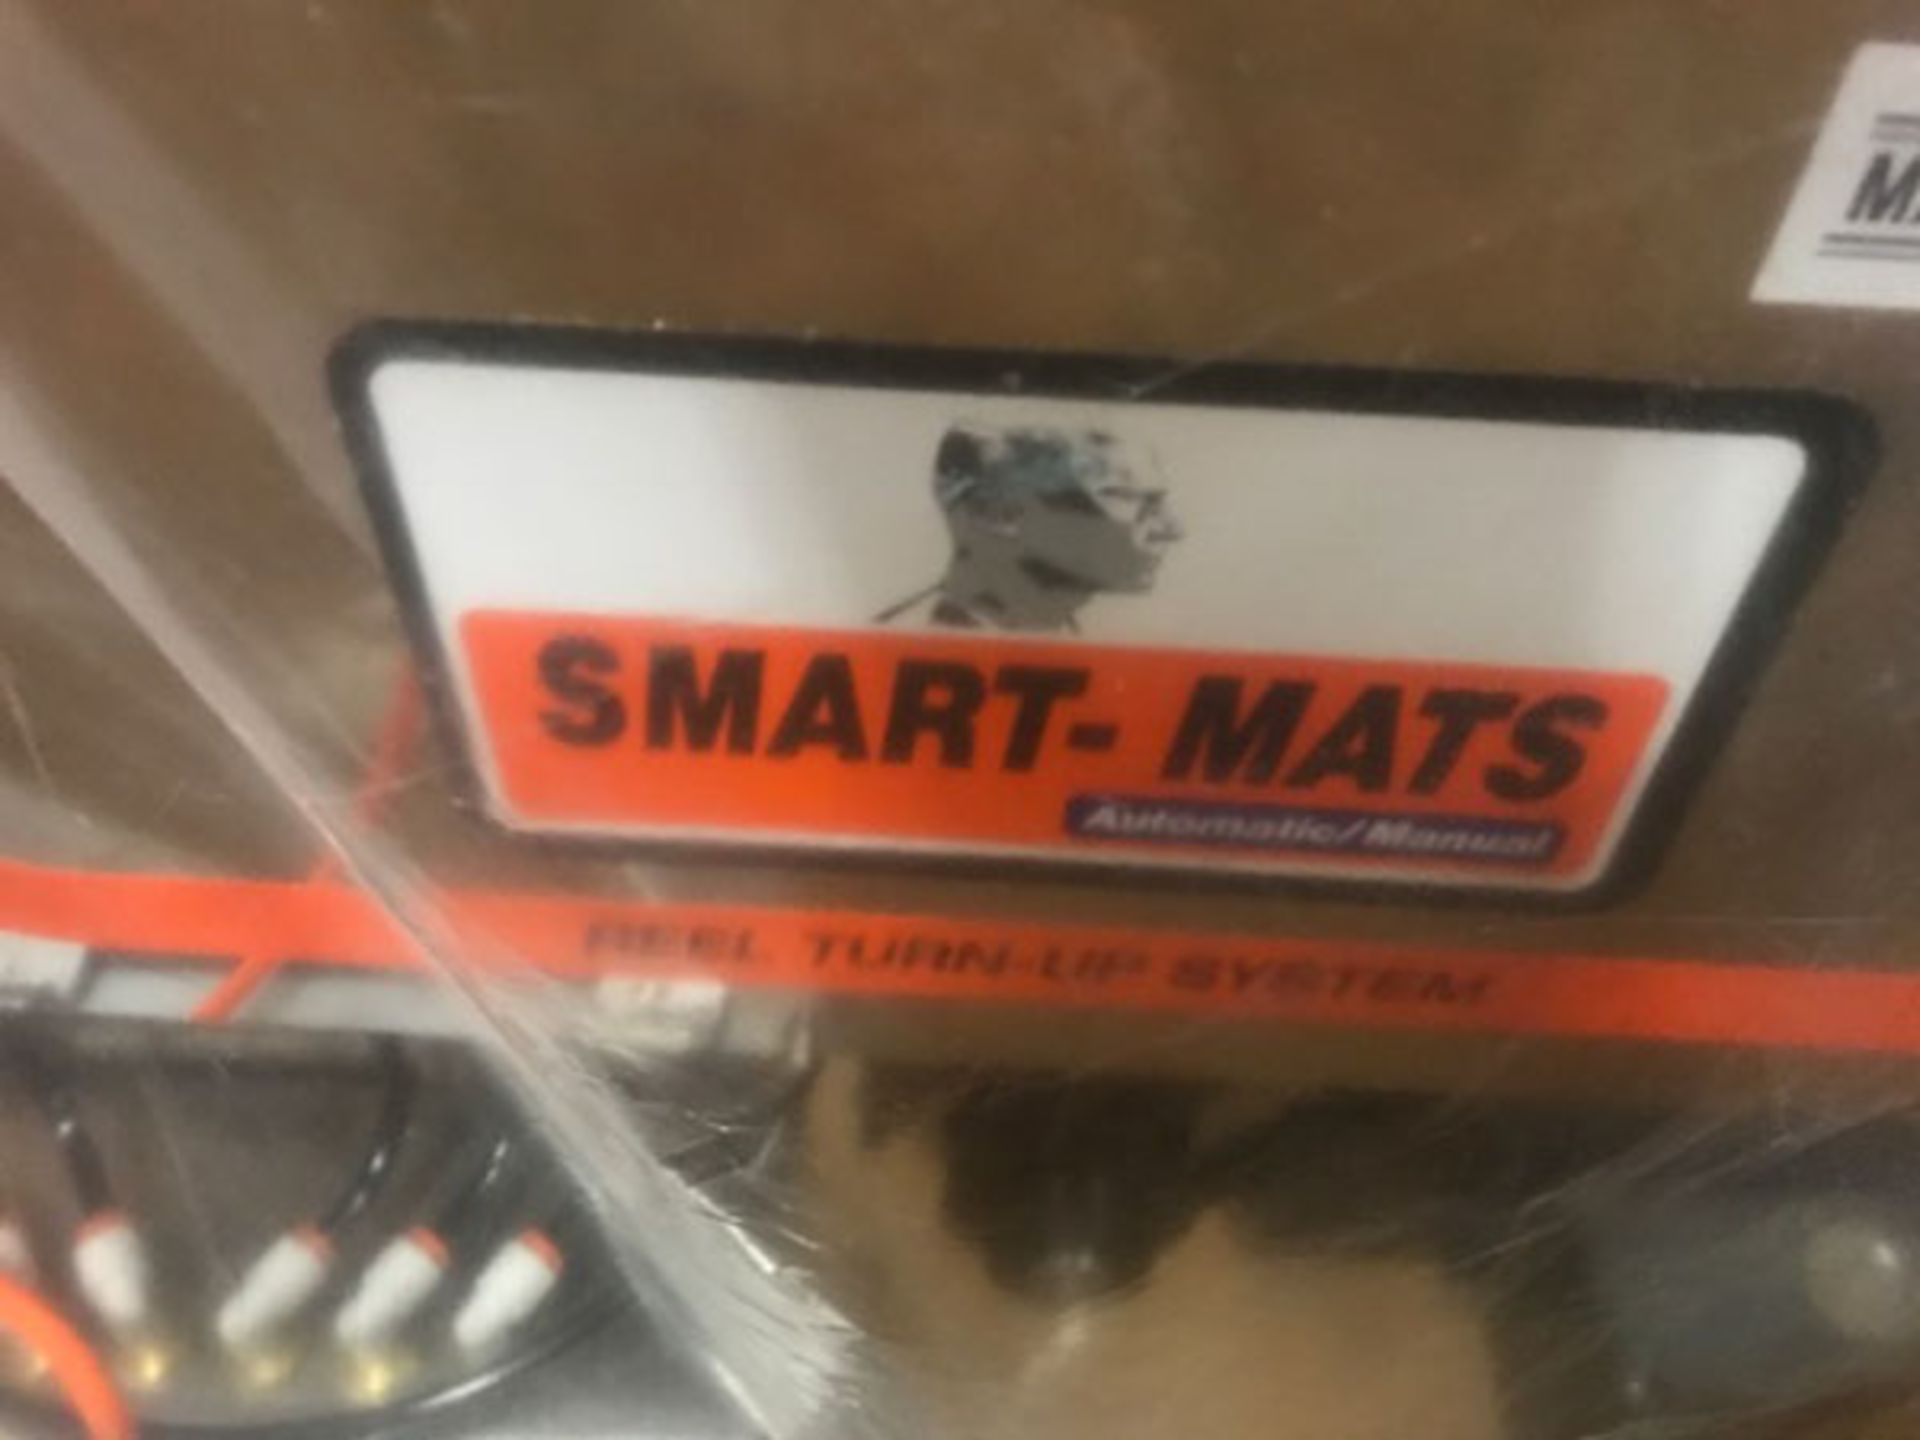 M.A. Industries Smart-Mats Spare- Mfg. 2013 (Never Used) - Located In Philadelphia, PA - Image 3 of 3